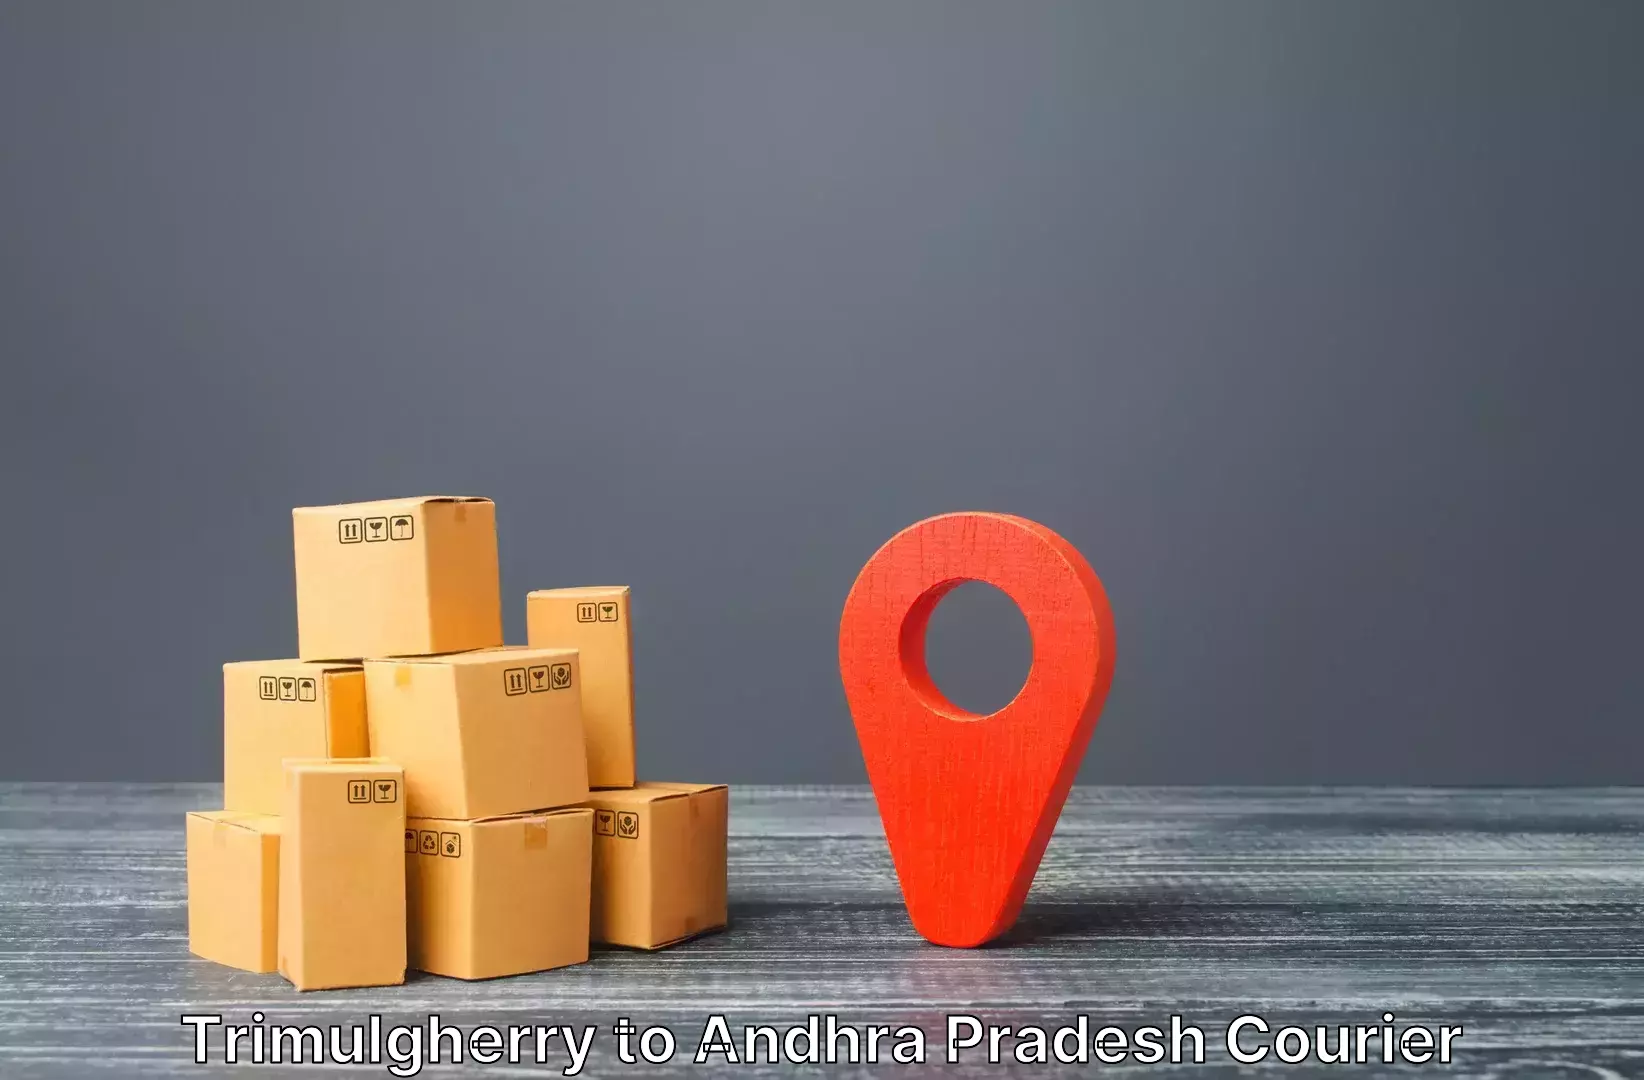 Electronic items luggage shipping in Trimulgherry to Pathapatnam